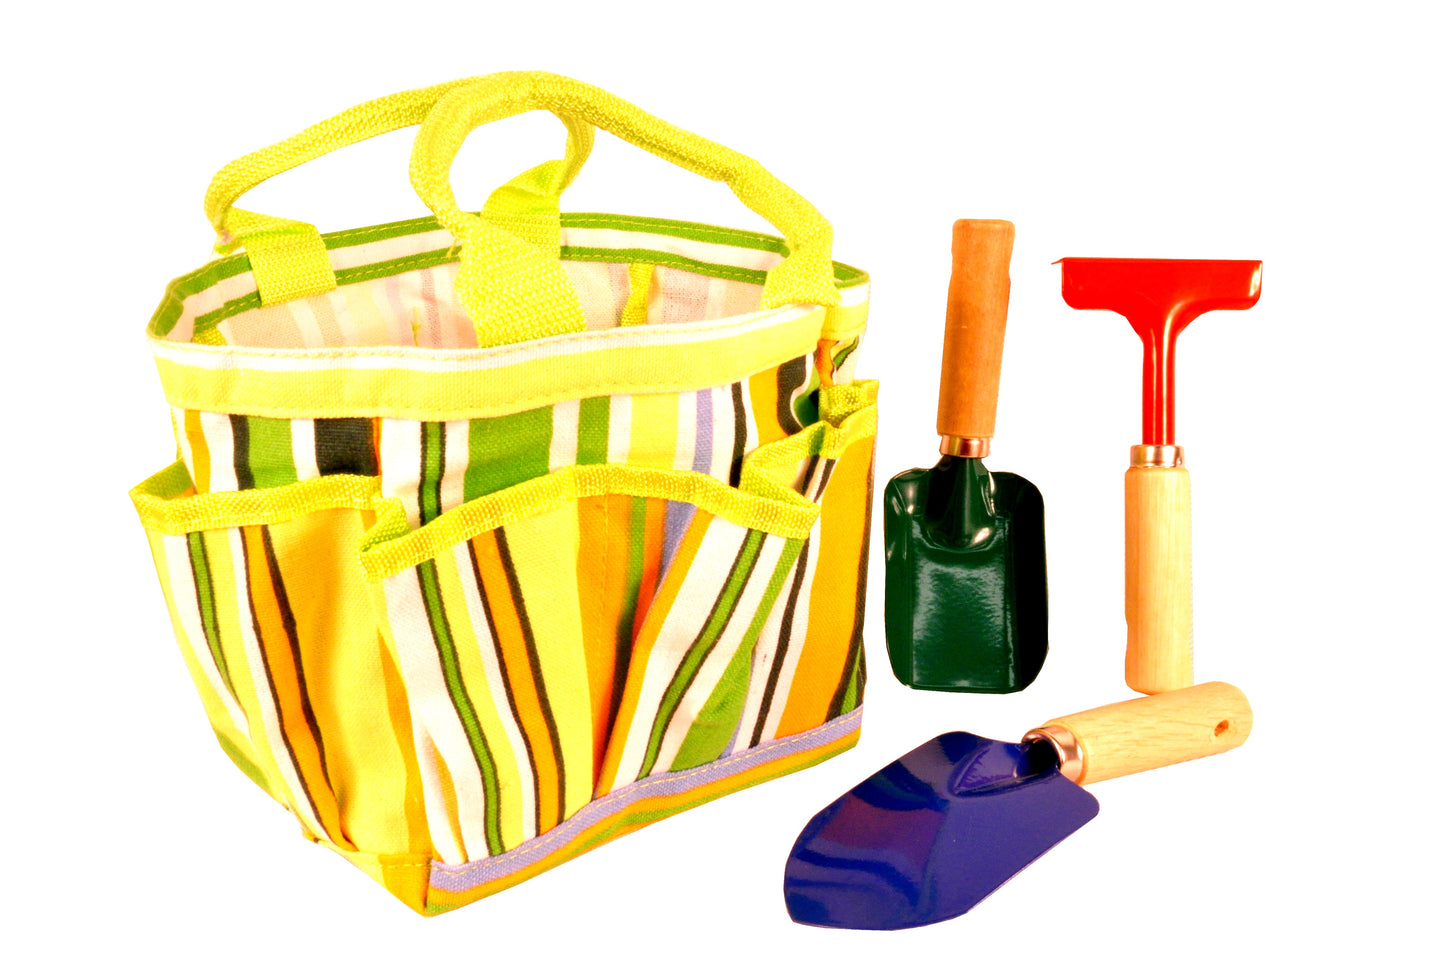 Kids Garden Tools Set with Tote